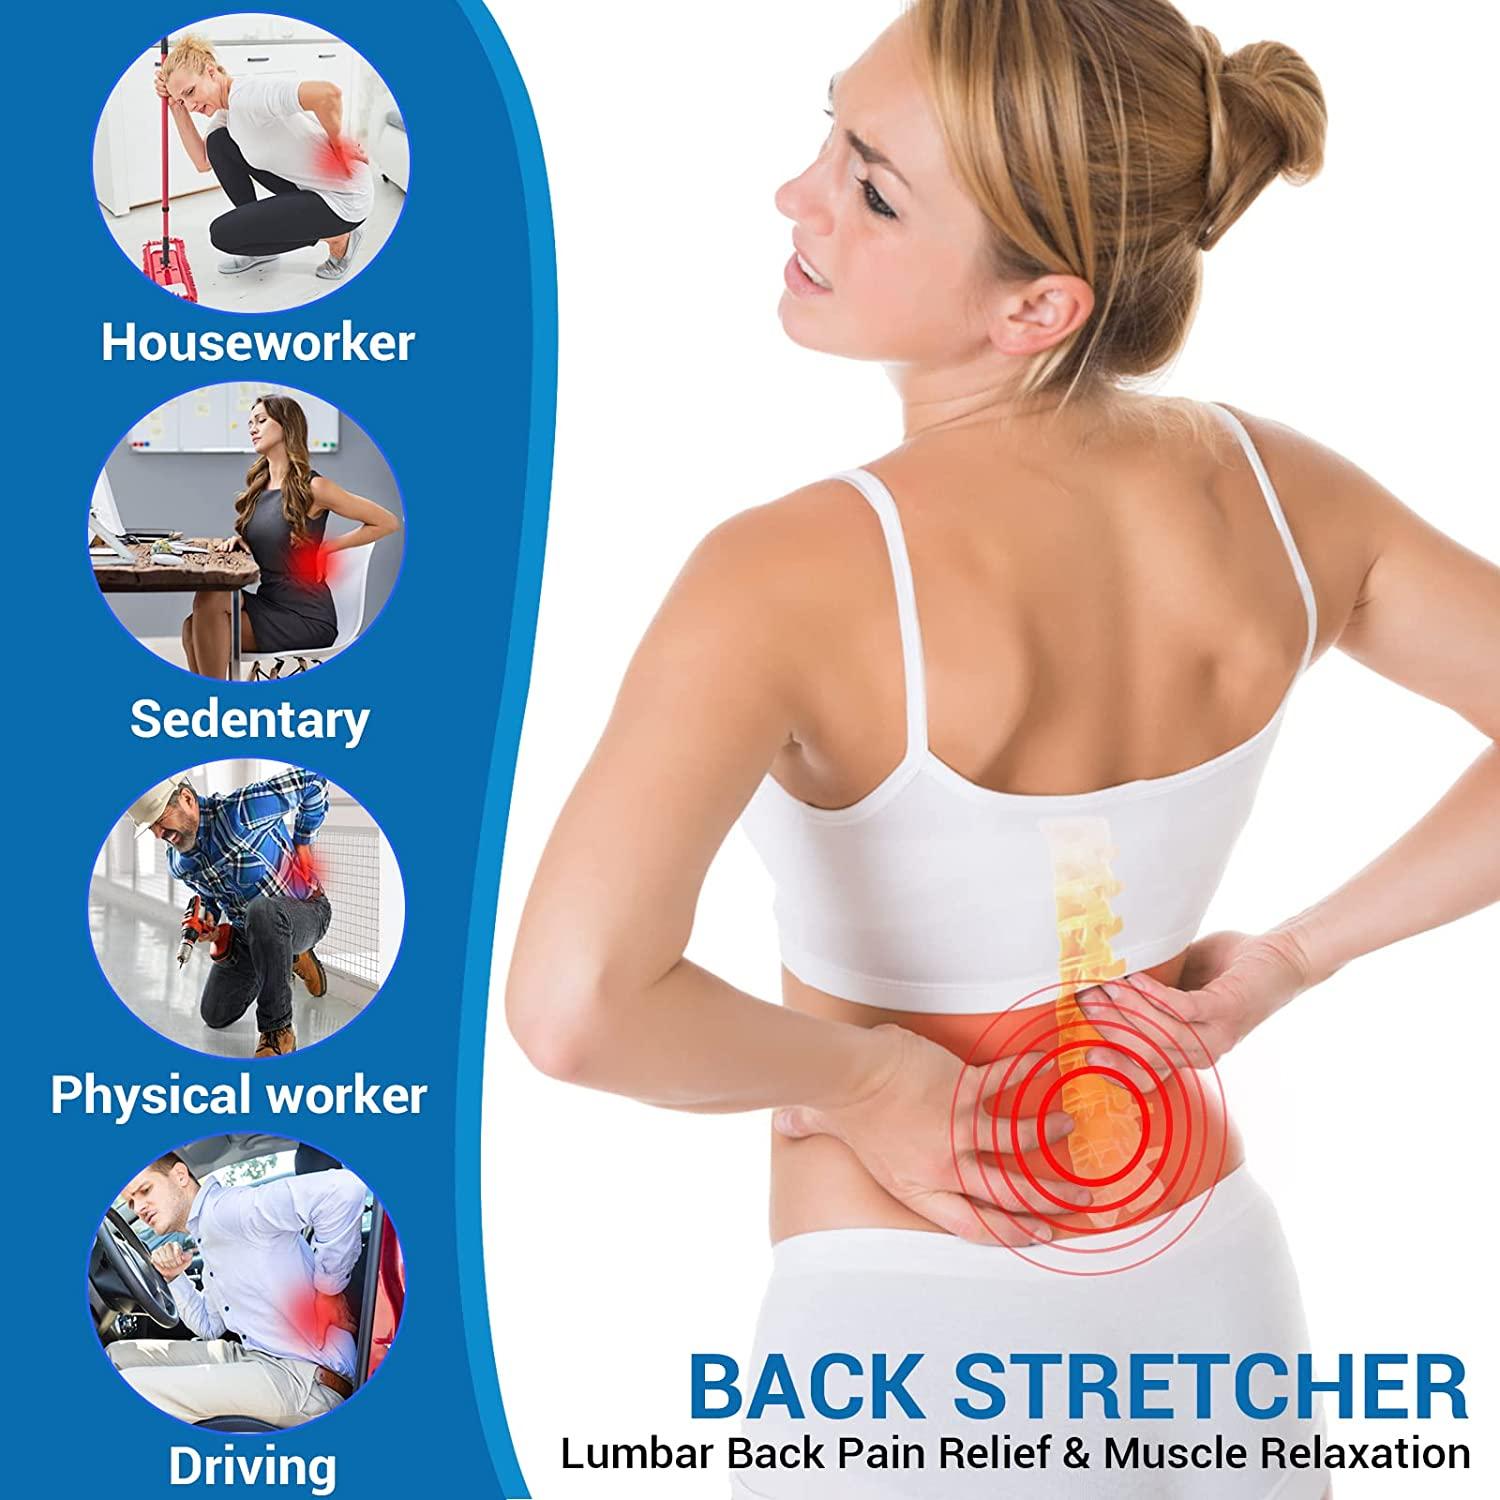 Spine Deck Back Stretcher for Lower Back Pain Relief, Multi-Level Spine  Stretcher Device for Lumbar Pain Relief, Lumbar Back Stretching Device, Back  Cracker